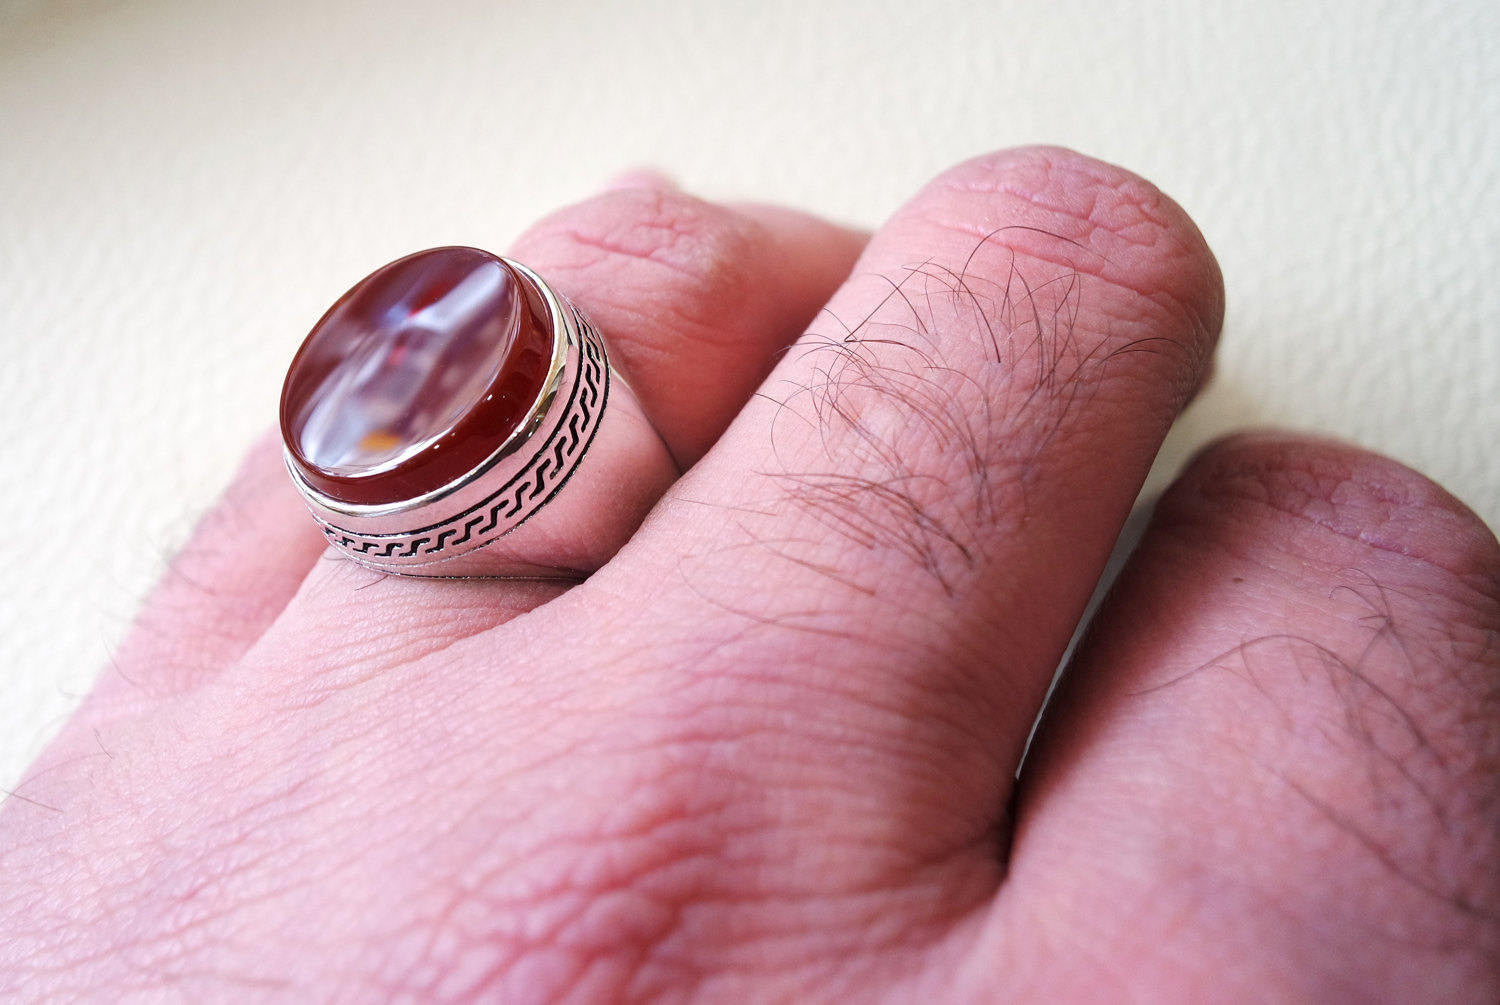 Aqeeq agate carnelian man ring sterling silver 925 red natural round flat semi precious  all sizes fast shipping middle eastern jewelry